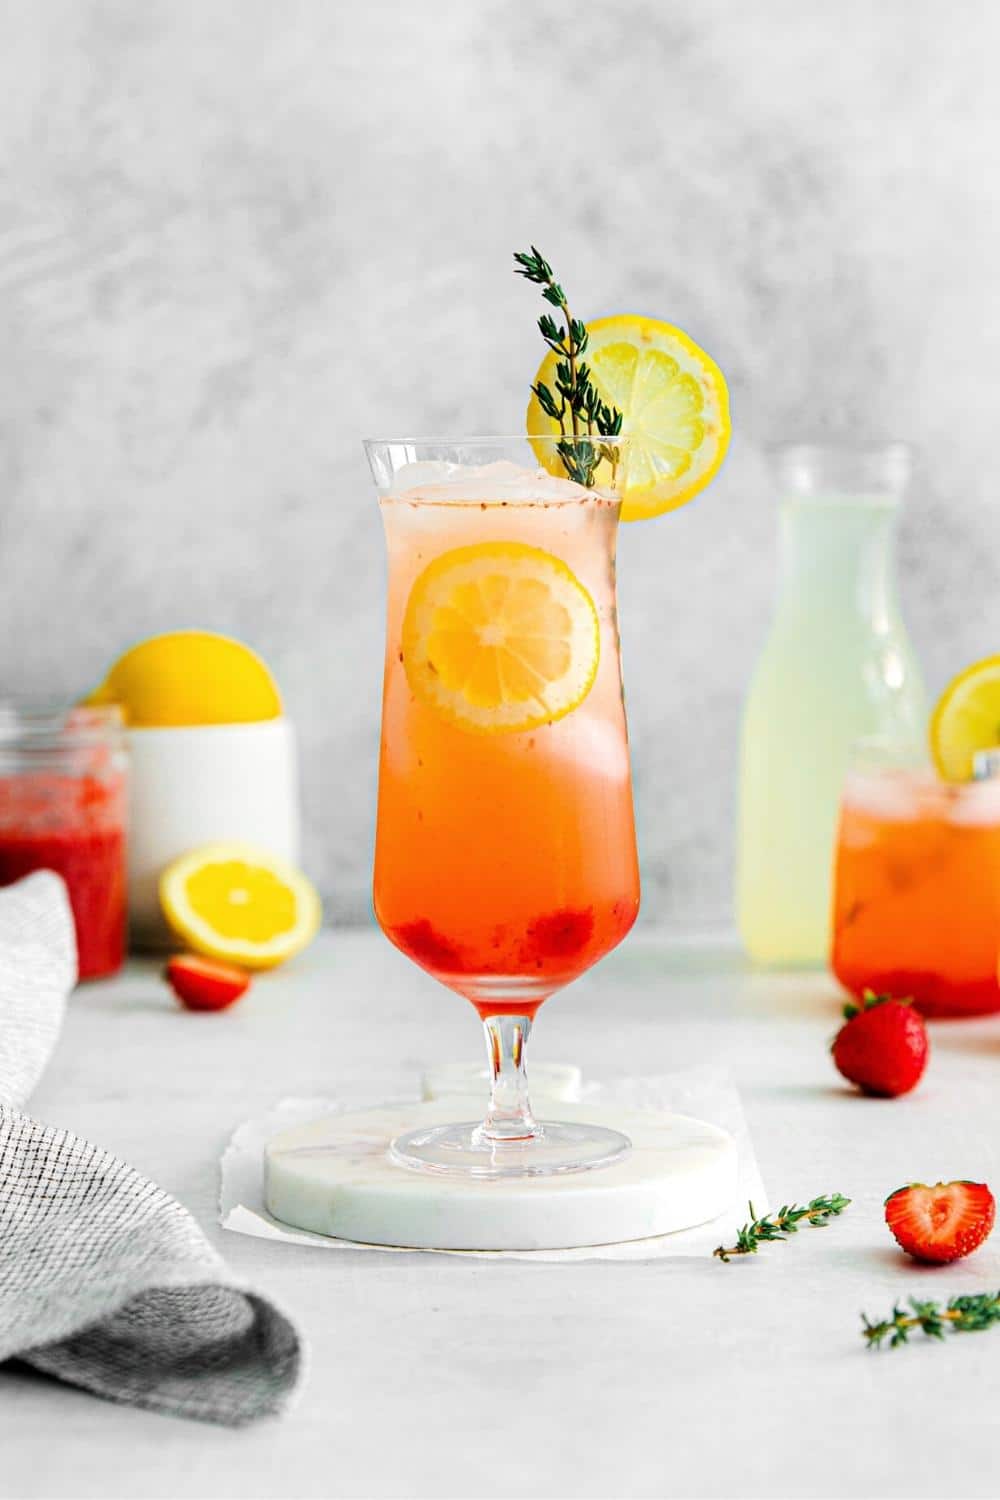 A tall glass of strawberry lemonade garnished with fresh slices of lemon and sprig of thyme.